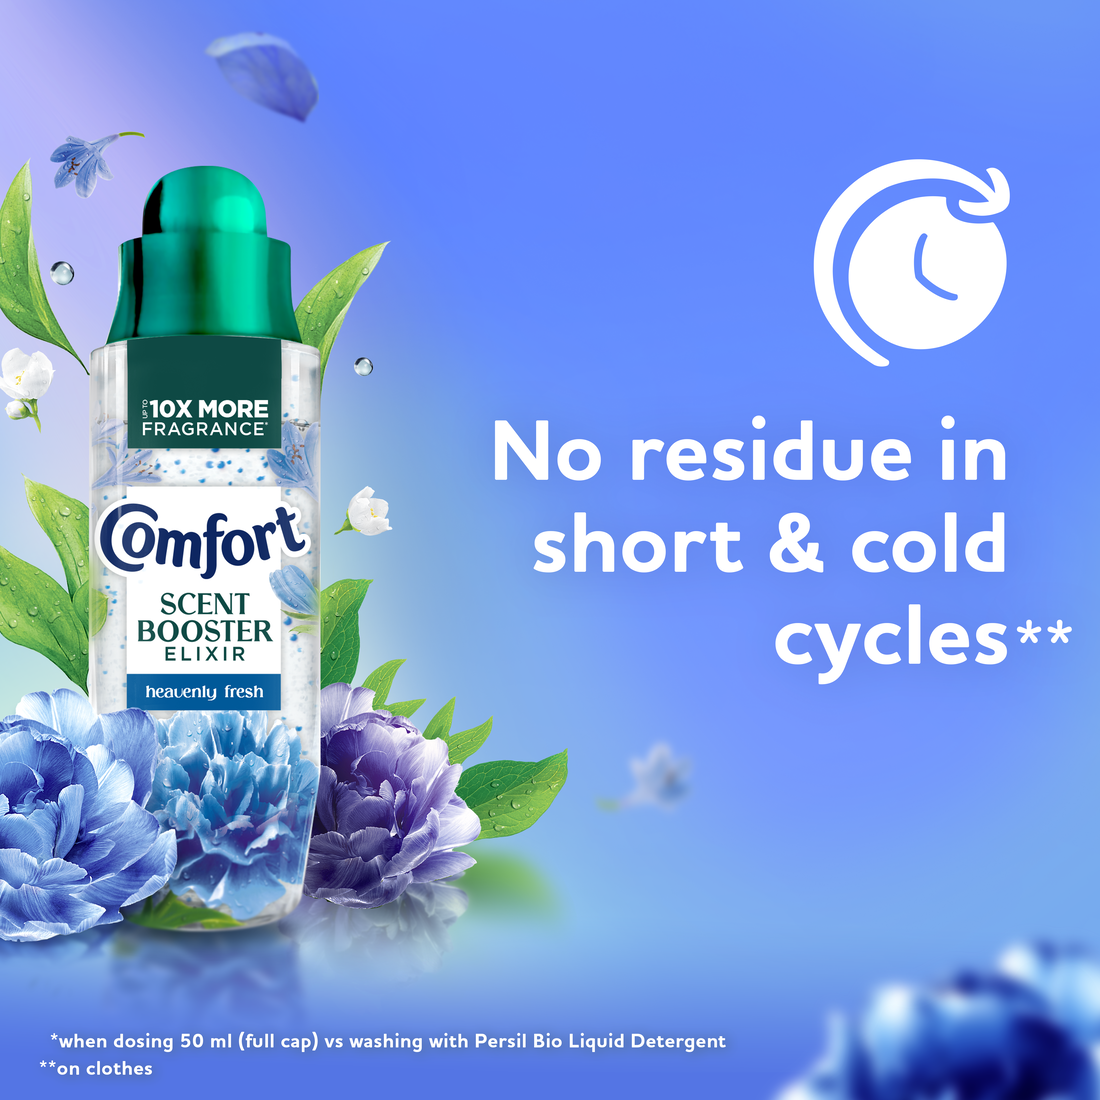 No residue in short & cold cycles

*when dosing 50ml (full cap) vs washing with Persil Bio Liquid Detergent
**on clothes